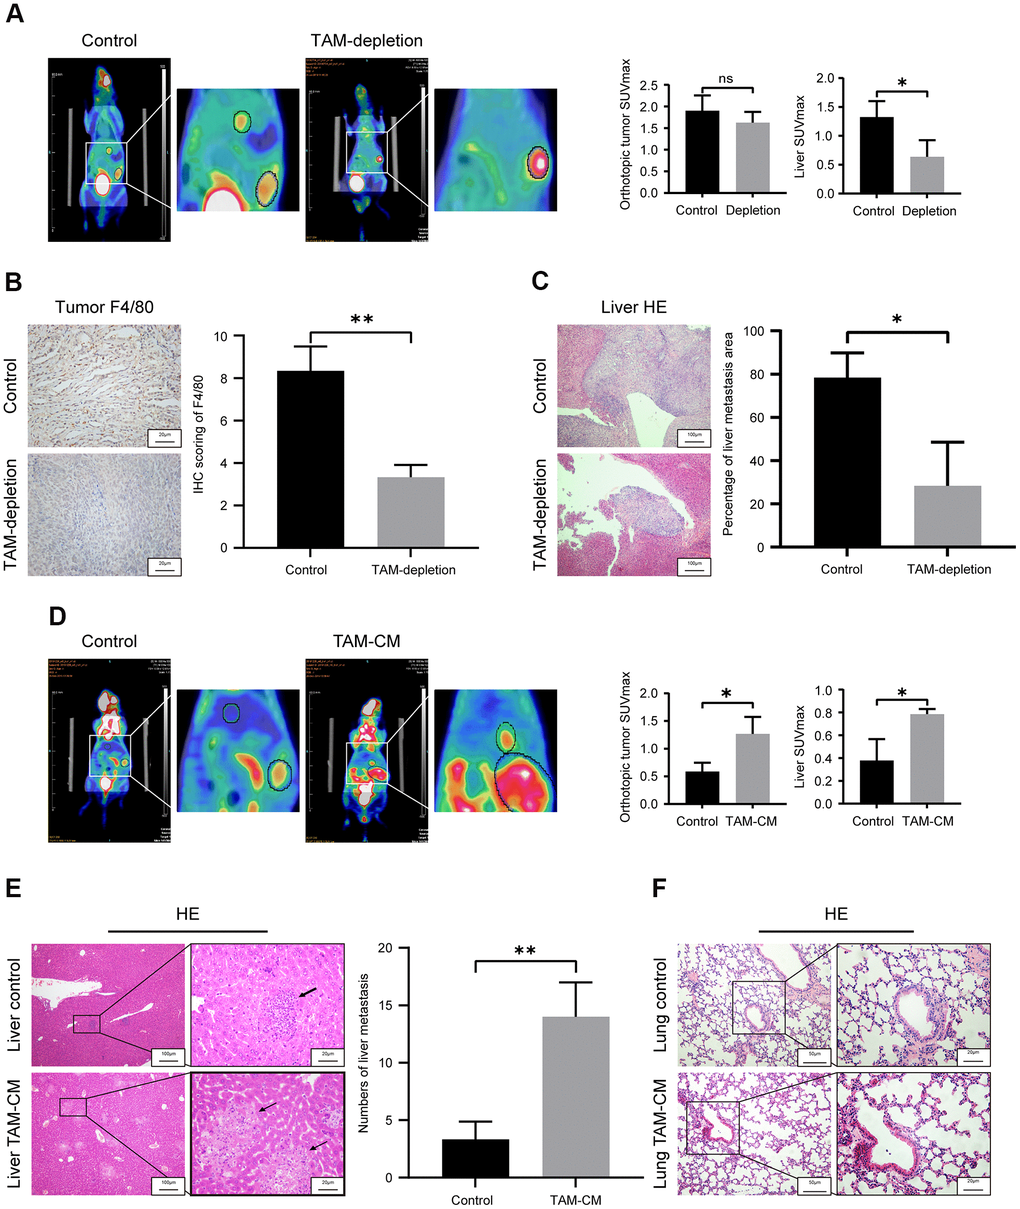 TAMs promote in vivo liver metastasis in the orthotopic PDAC tumor model mice. (A) Positron emission tomography/computed tomography (PET/CT) scanning images show primary pancreatic tumor and liver metastatic lesions in control and TAM-depletion group mice treated with clodronate-liposomes (CLDs). Note: n=6, *P B) IHC staining analysis shows expression of F4/80 in the primary PDAC tumor tissues from the control and TAM-depletion group mice. Scale bar = 20 μm; **P C) Representative images show H&E staining analyses of metastatic lesions in the liver sections from control and TAM-depletion group mice treated with clodronate-liposomes (CLDs). Scale bar = 100 μm, *P D) PET/CT scanning images show primary PDAC tumor and liver metastatic lesions in the control and TAM-CM treatment group mice. Note: n = 6; *P E) Representative images show H&E staining analyses of metastatic lesions in the liver tissues from control and TAM-CM treatment group mice. Scale bar = 20 μm; **P F) Representative images show H&E staining analyses of lung tissues from the control and TAM-CM group mice. Scale bar = 50 μm.